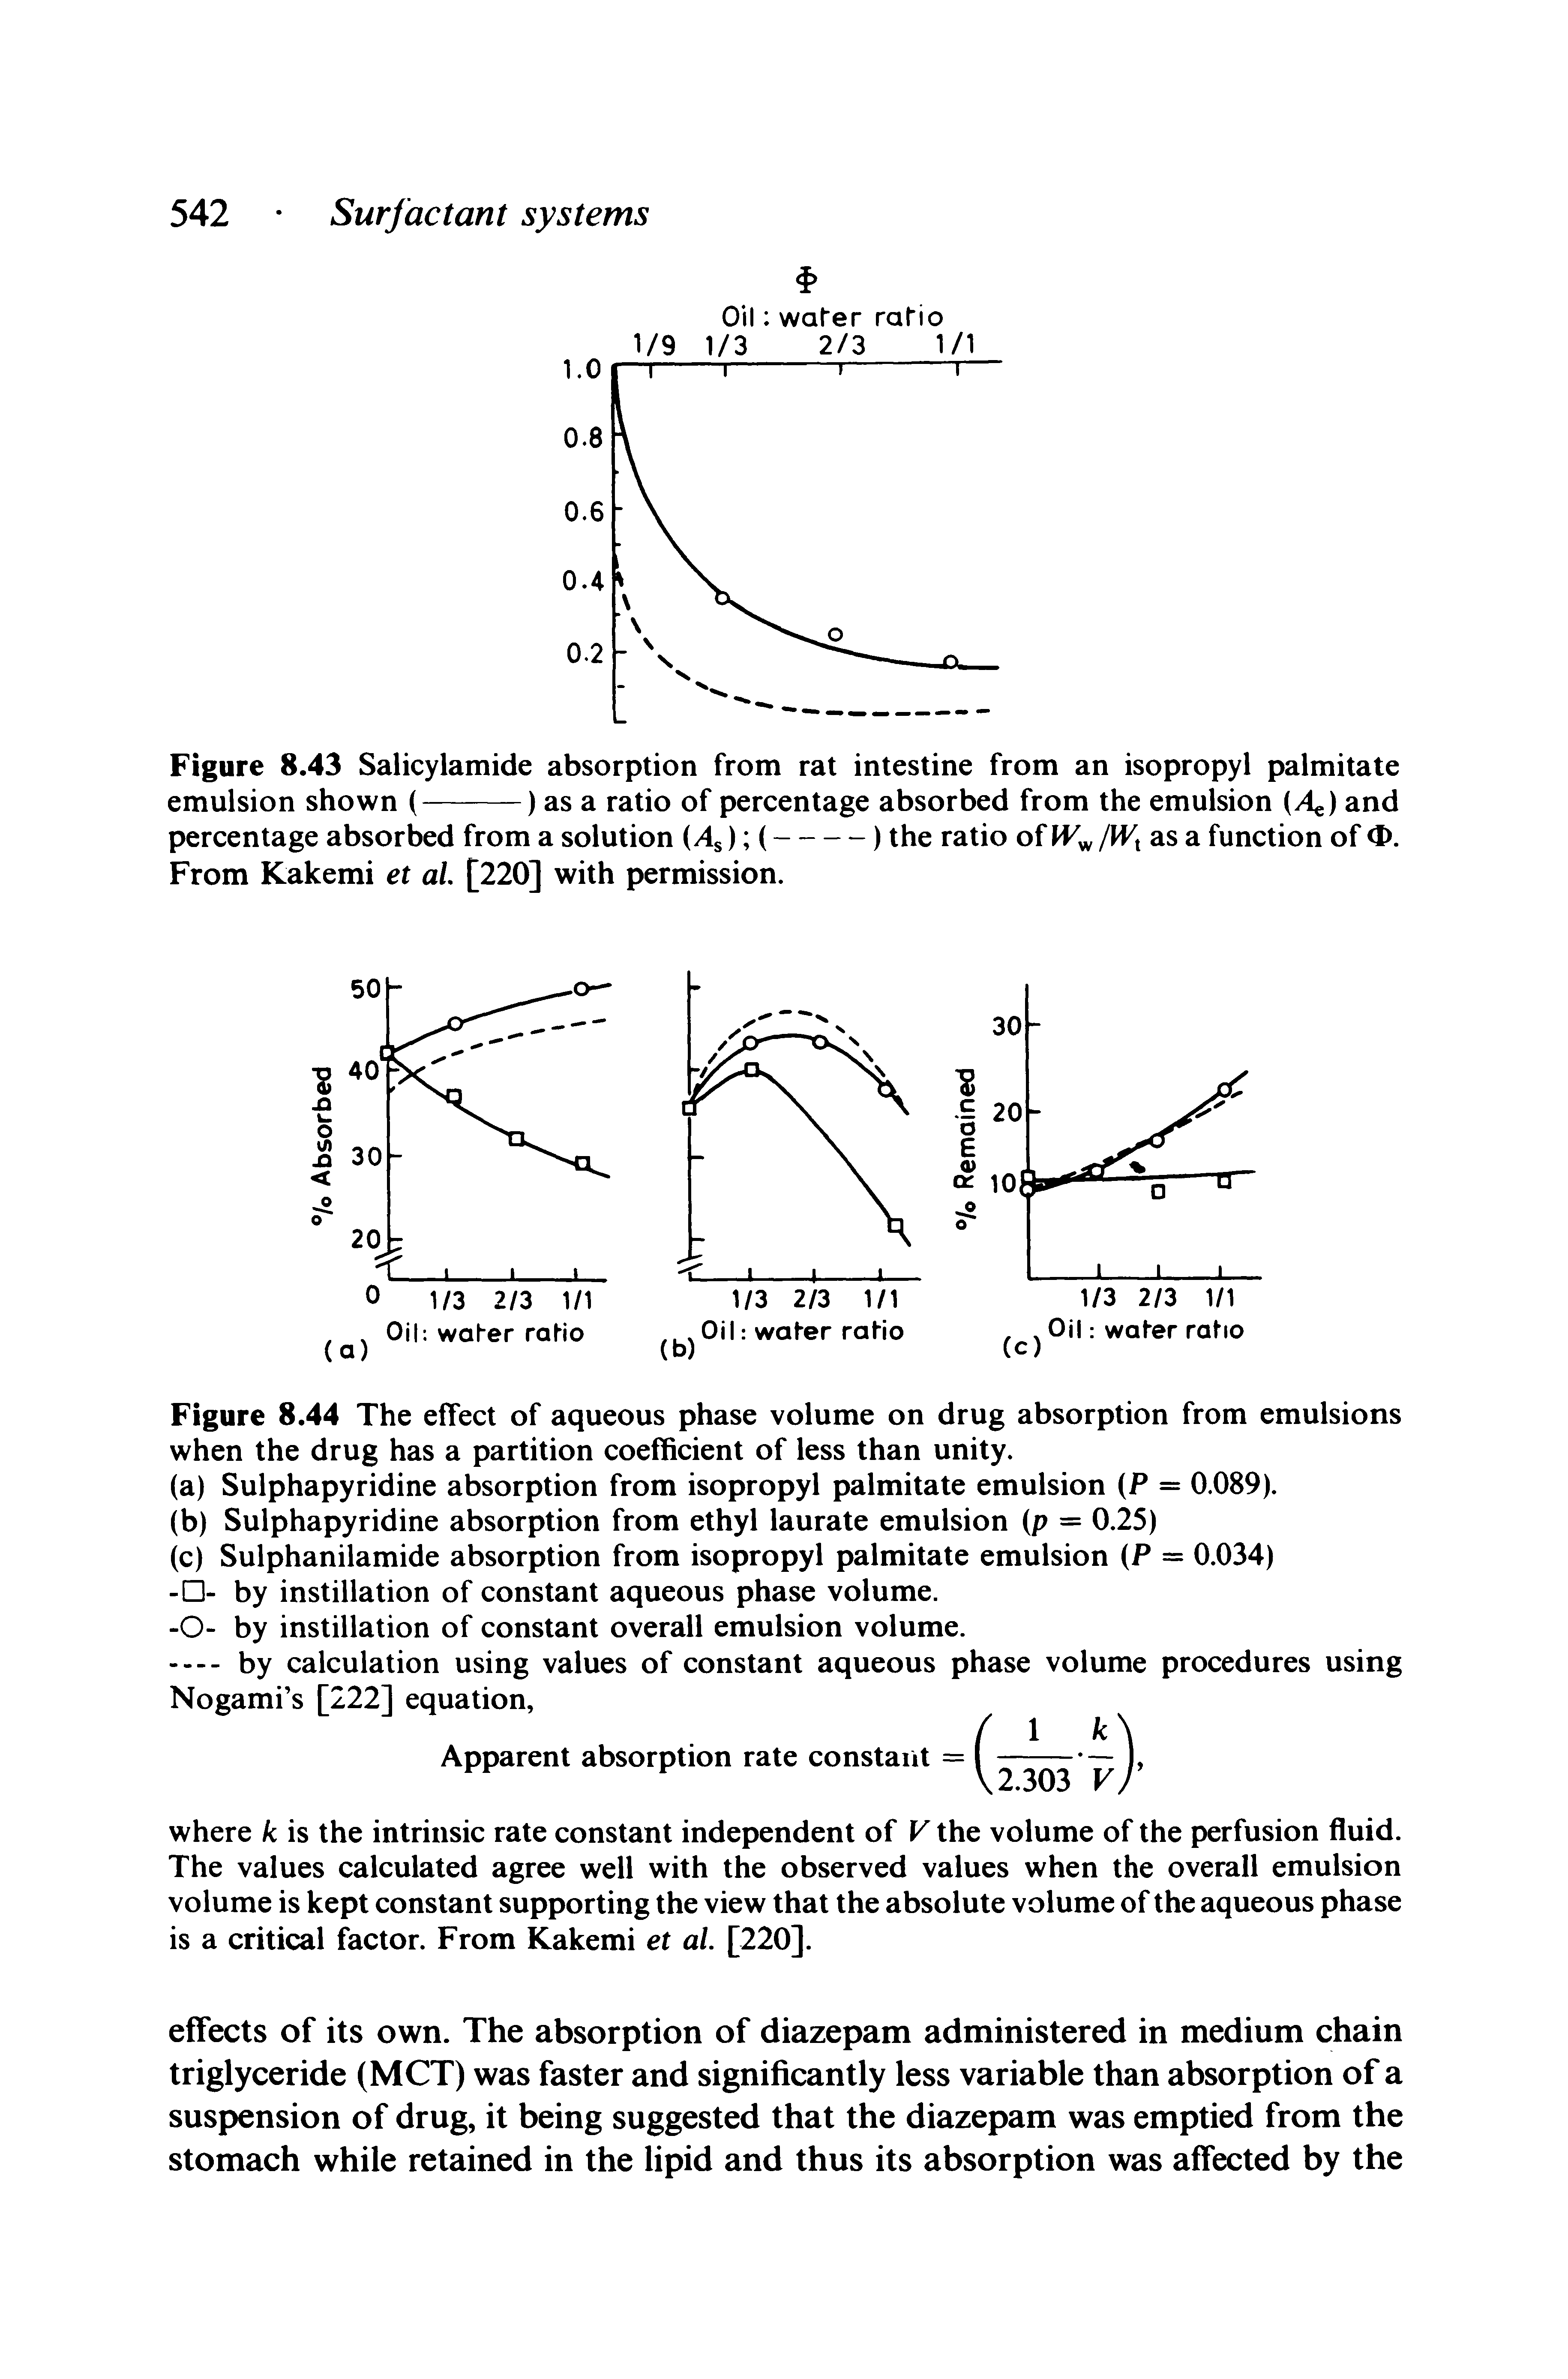 Figure 8.44 The effect of aqueous phase volume on drug absorption from emulsions when the drug has a partition coefficient of less than unity.